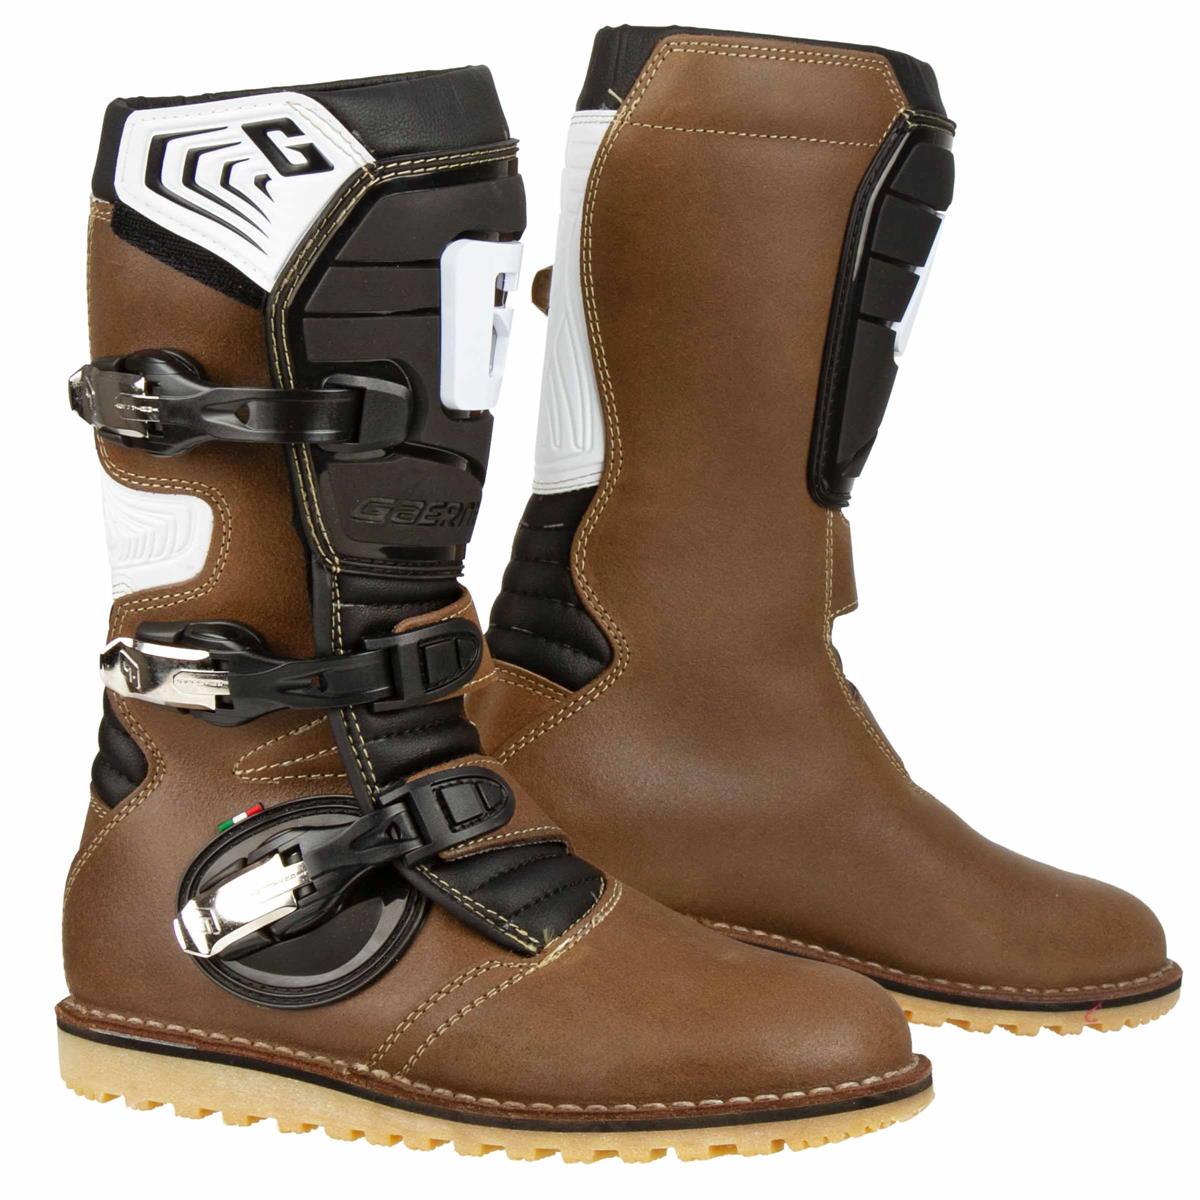 Gaerne Touring Boots Balance Pro Tech Brown